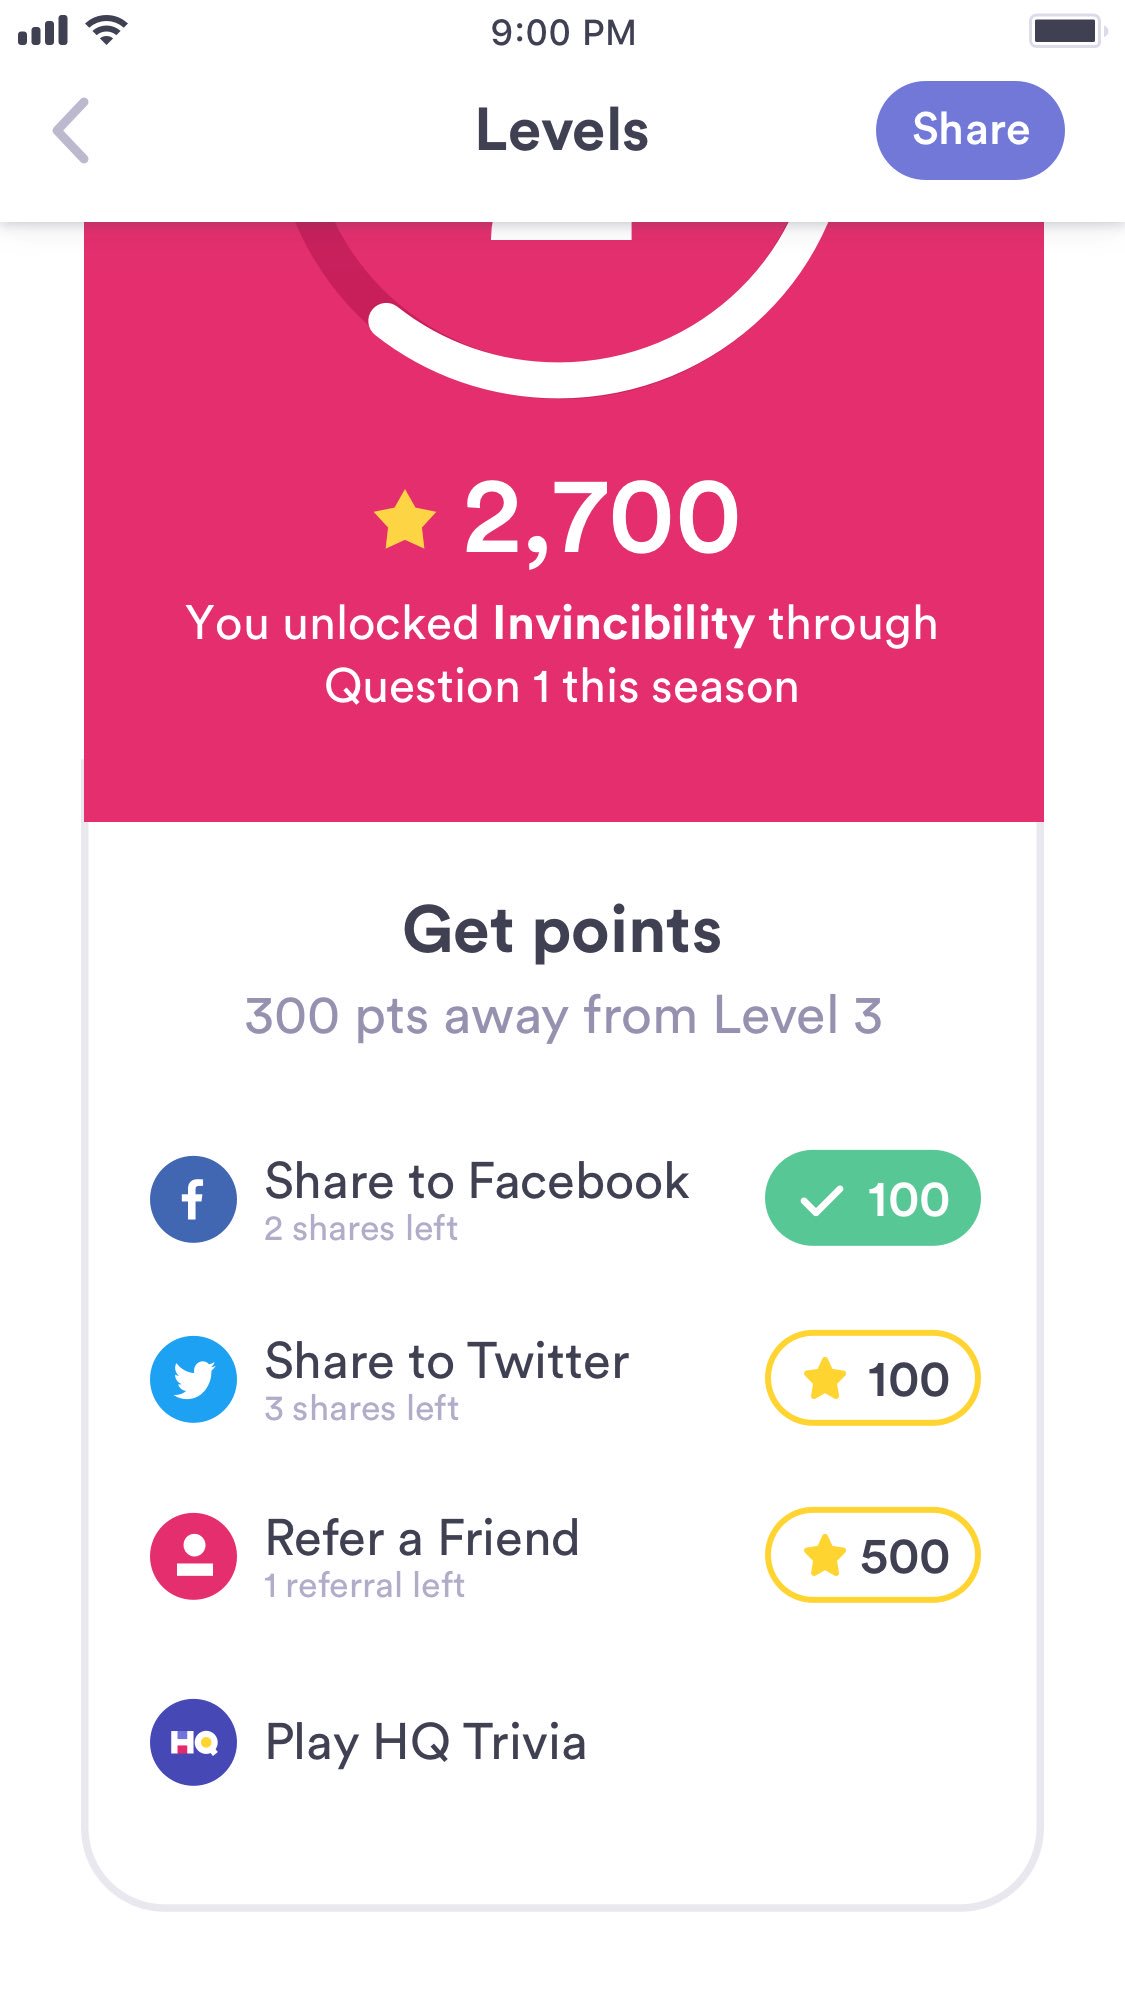 Hq Support On Twitter Q Can I Continue To Earn Points With A Free Pass A Yes For Every Question You Answer Correctly You Will Continue To Earn Points If You Have